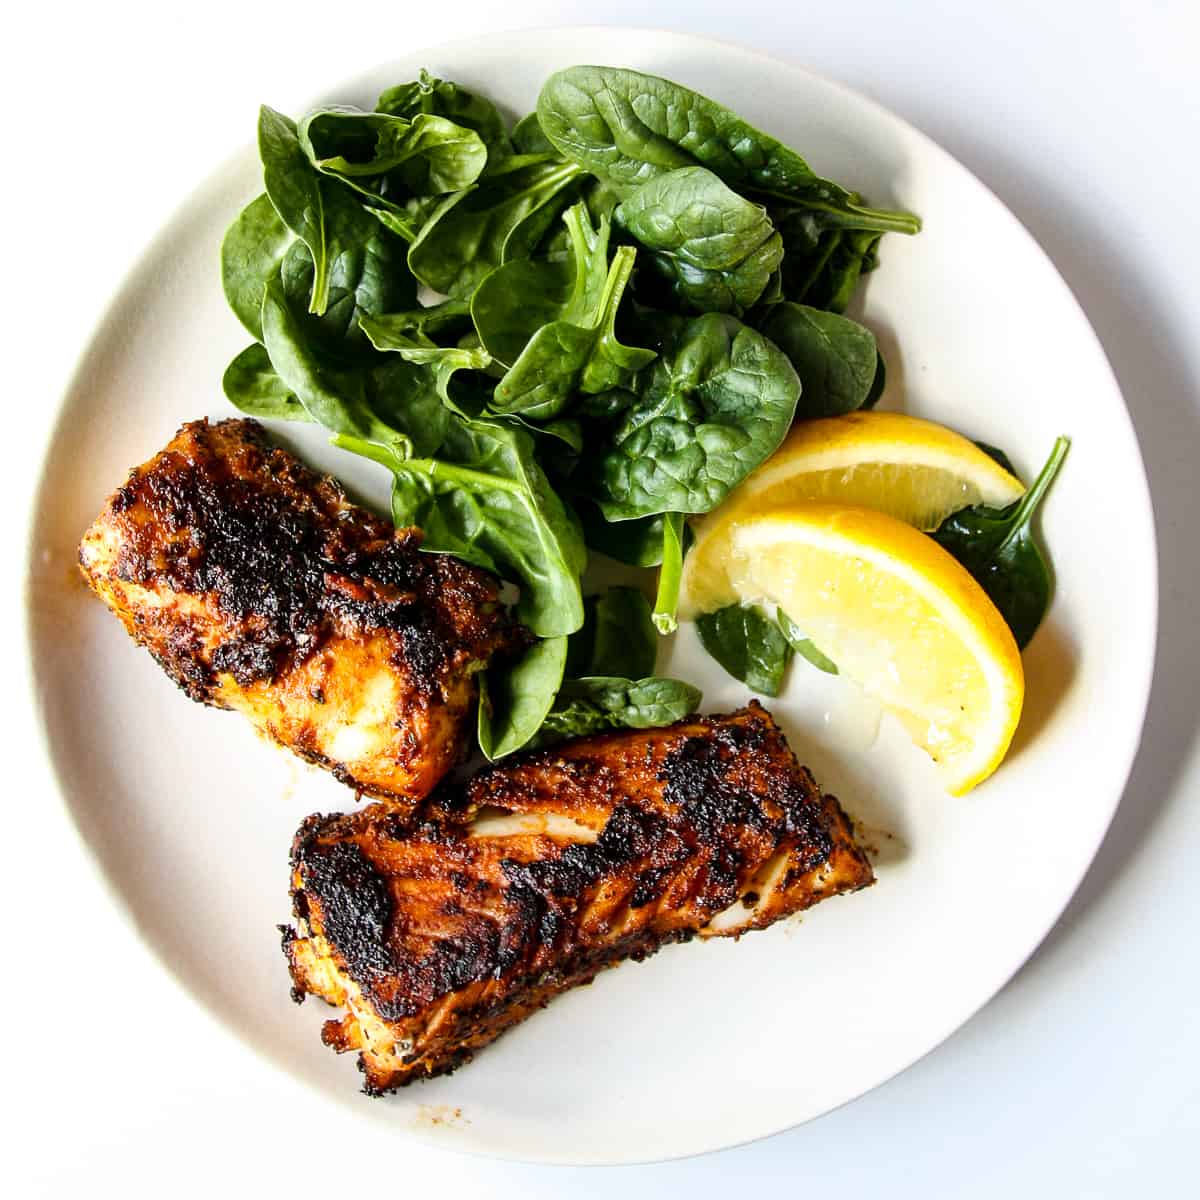 2 blackened cod loin pieces on a white plate with lemon wedges and salad greens.